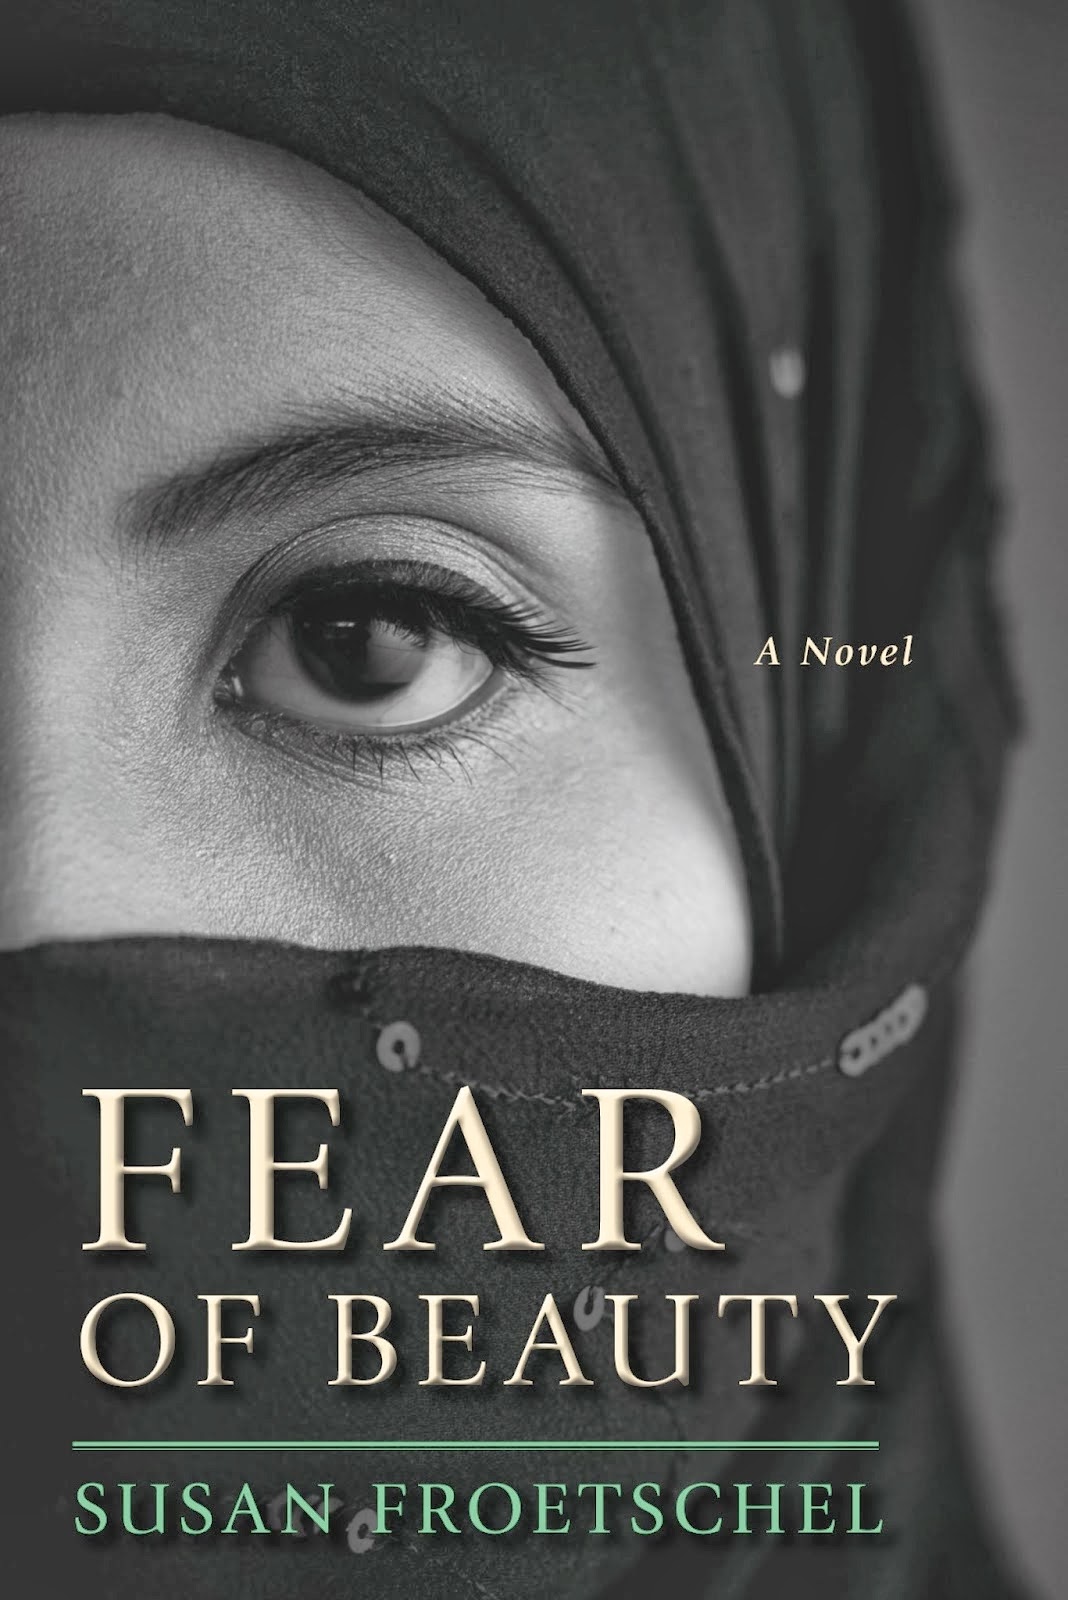 http://discover.halifaxpubliclibraries.ca/?q=title:fear%20of%20beauty